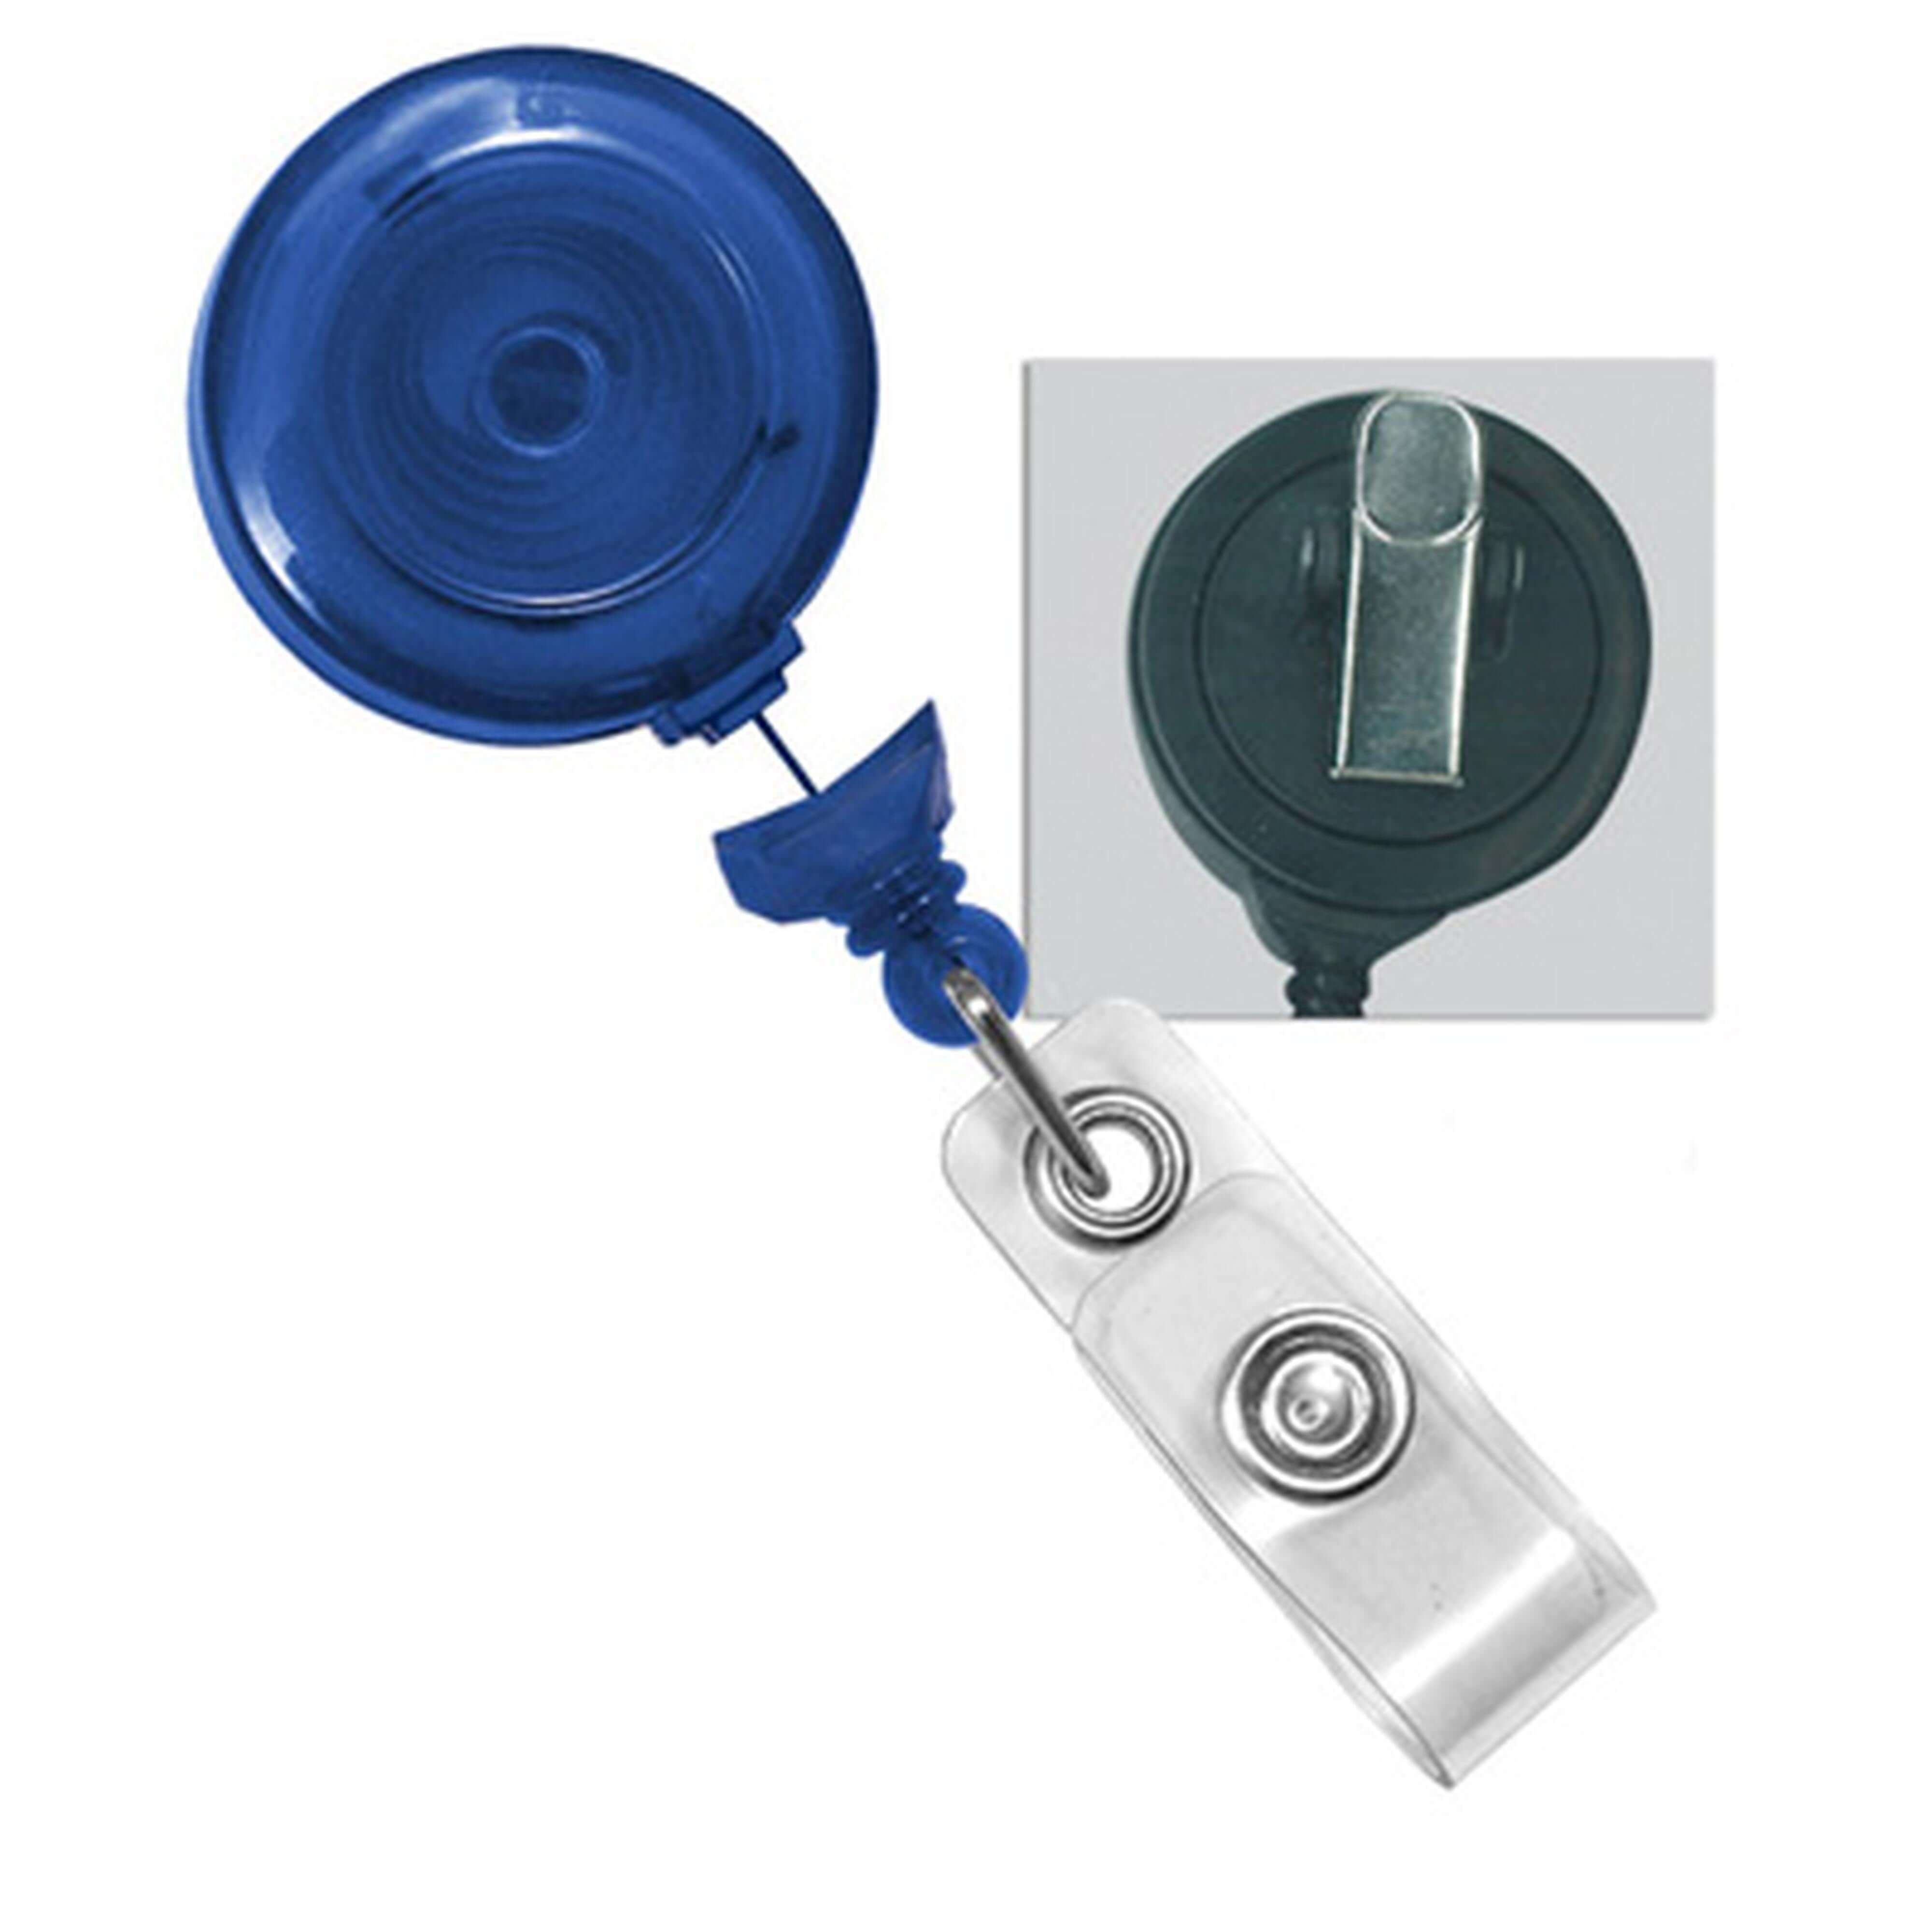 Shop for and Buy Clip-on Plastic Retractable Badge Holder at